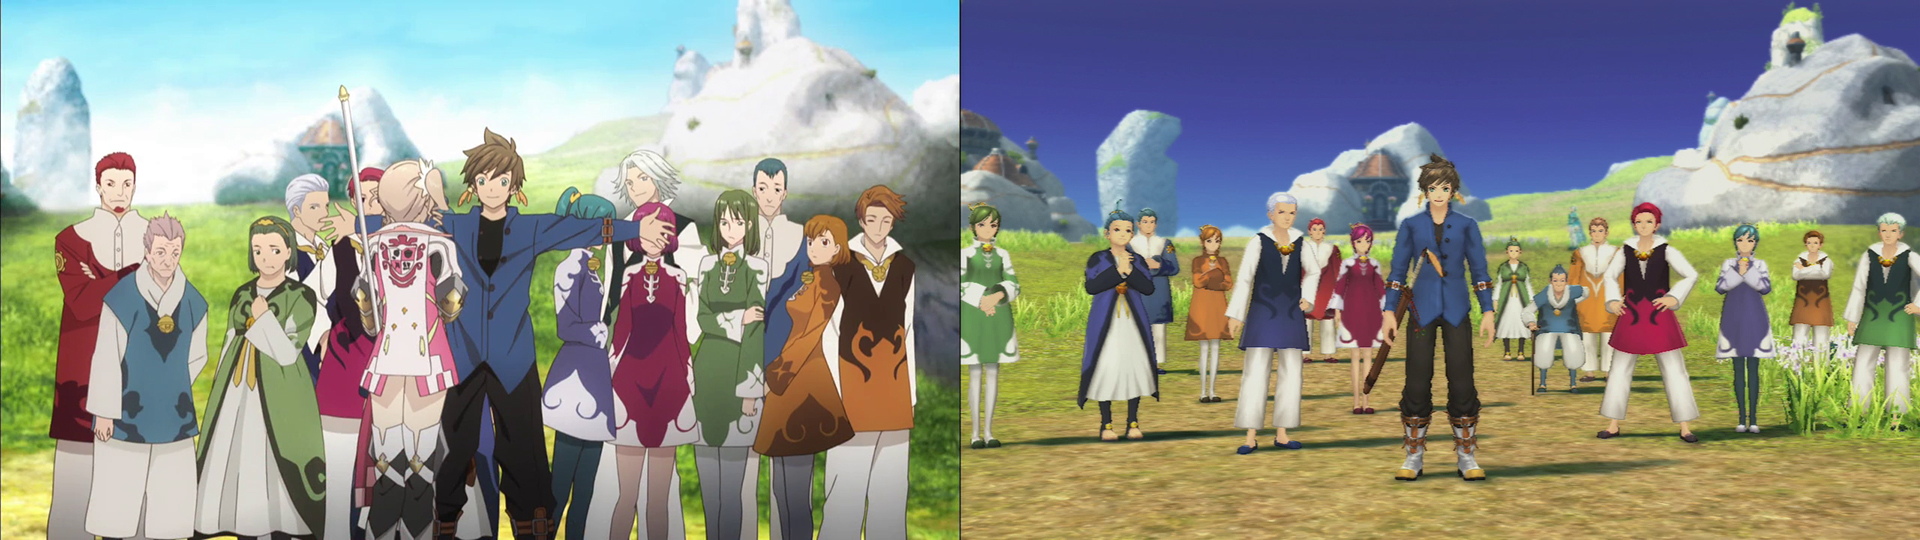 Let’s Compare The Tales Of Zestiria Anime To The Game